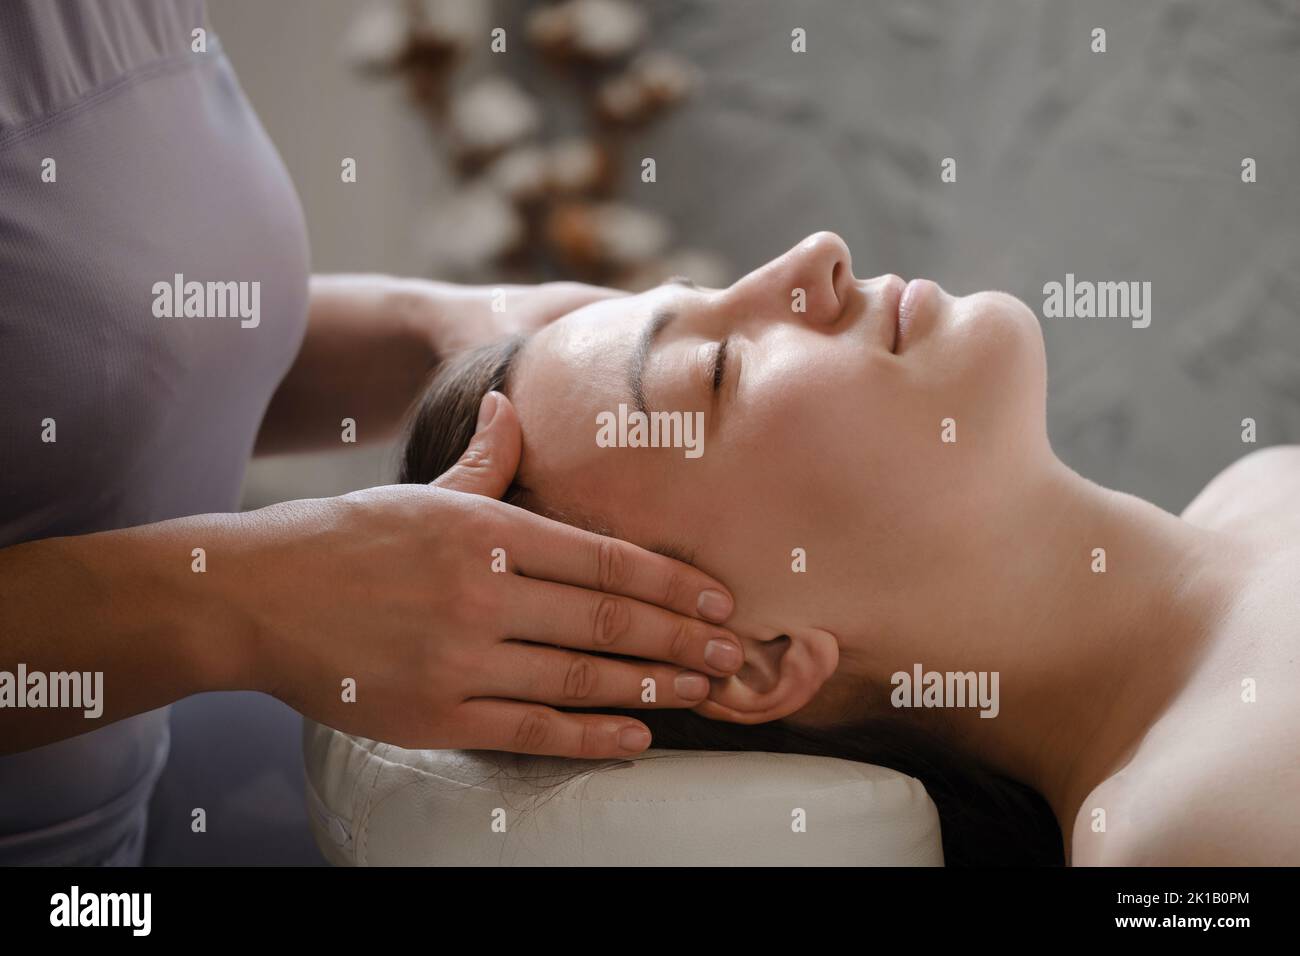 face massage with oil in traditional style made by professional beauty therapist women. anti-age massage Stock Photo